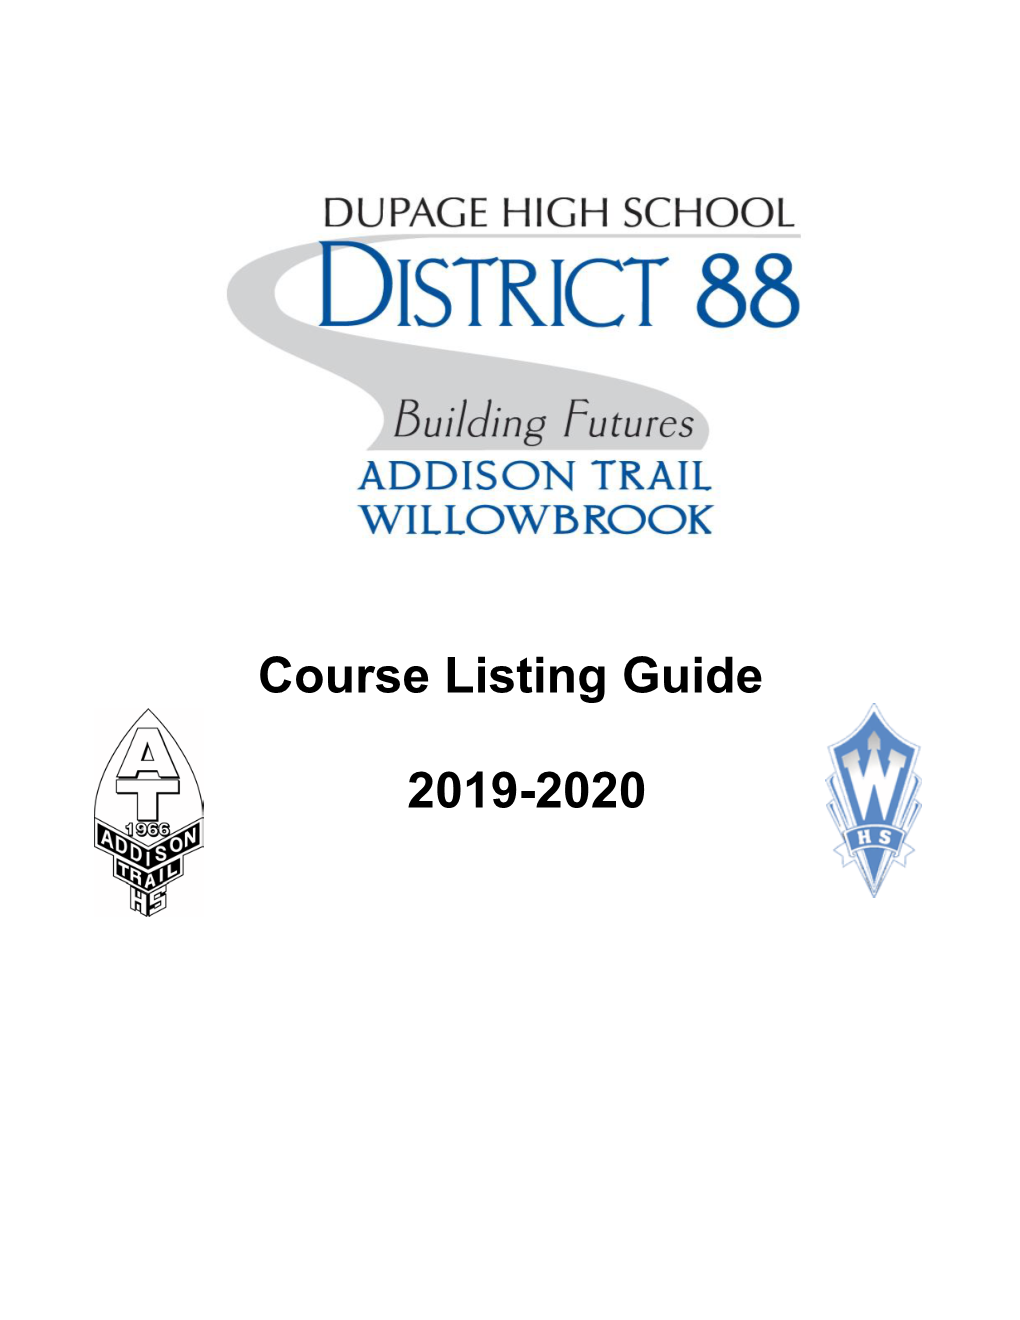 Course Listing Guide 2019-2020